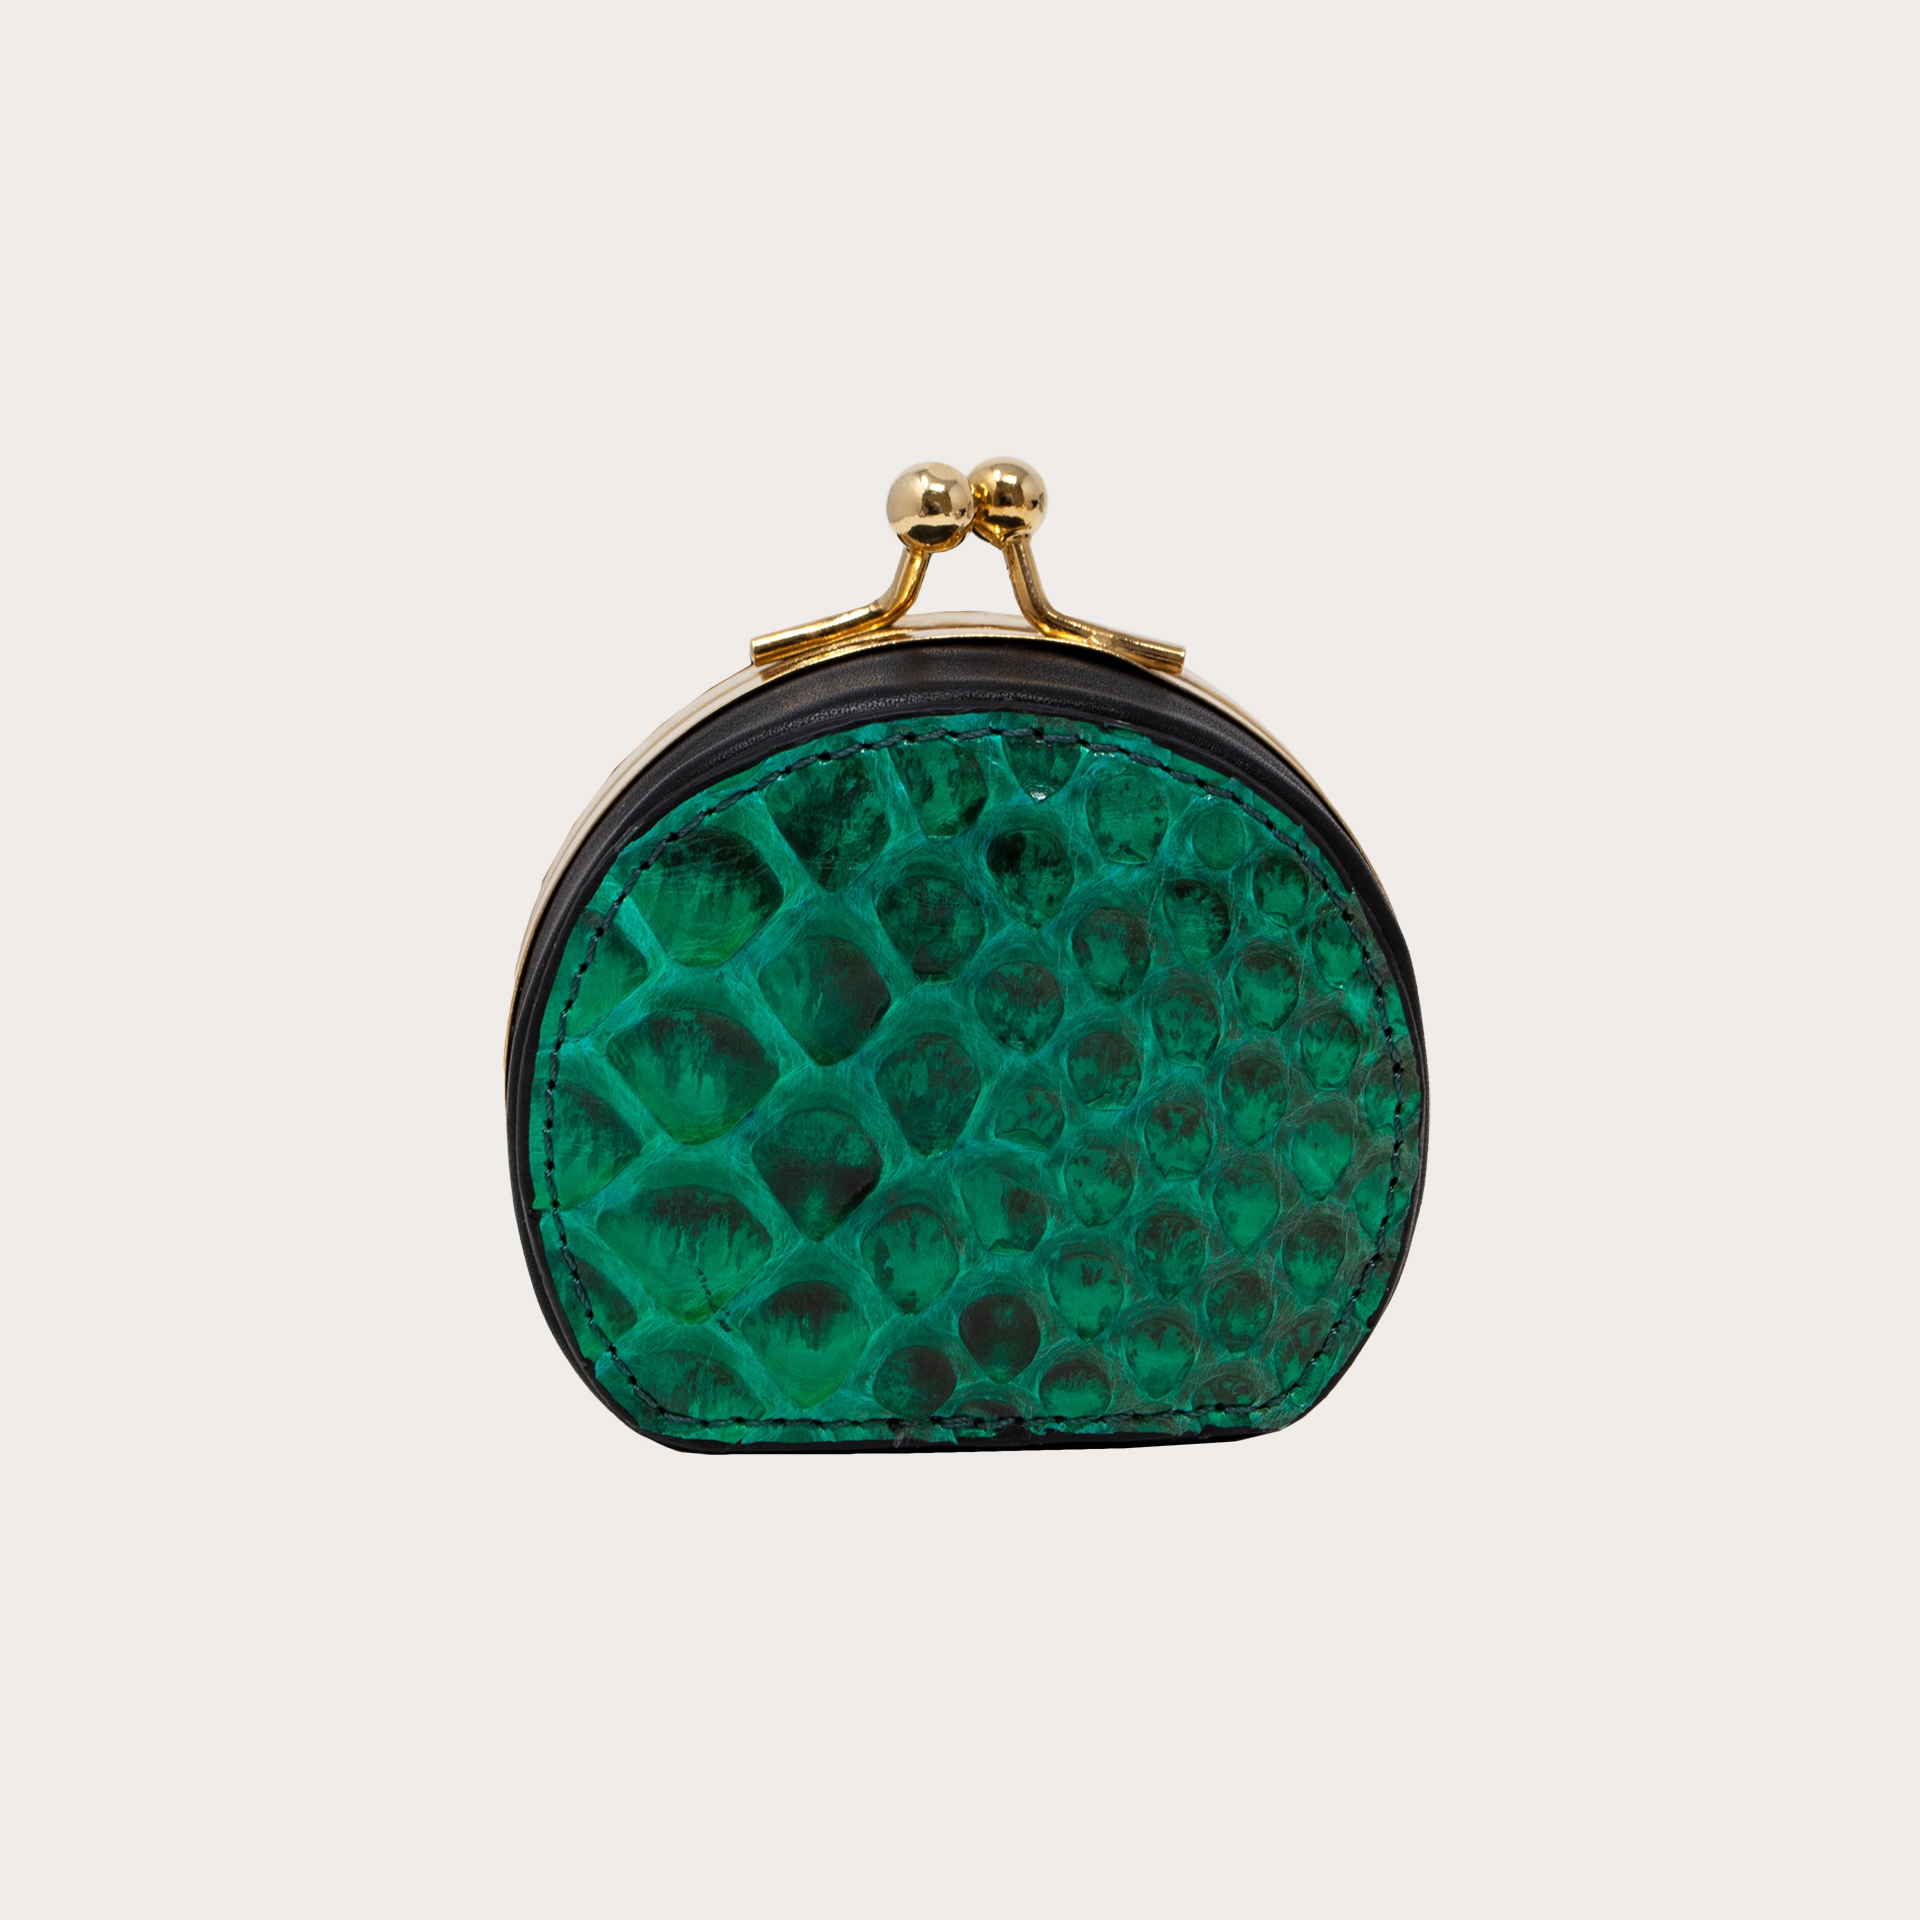 Coin purse in buffered front cut python leather, green and black